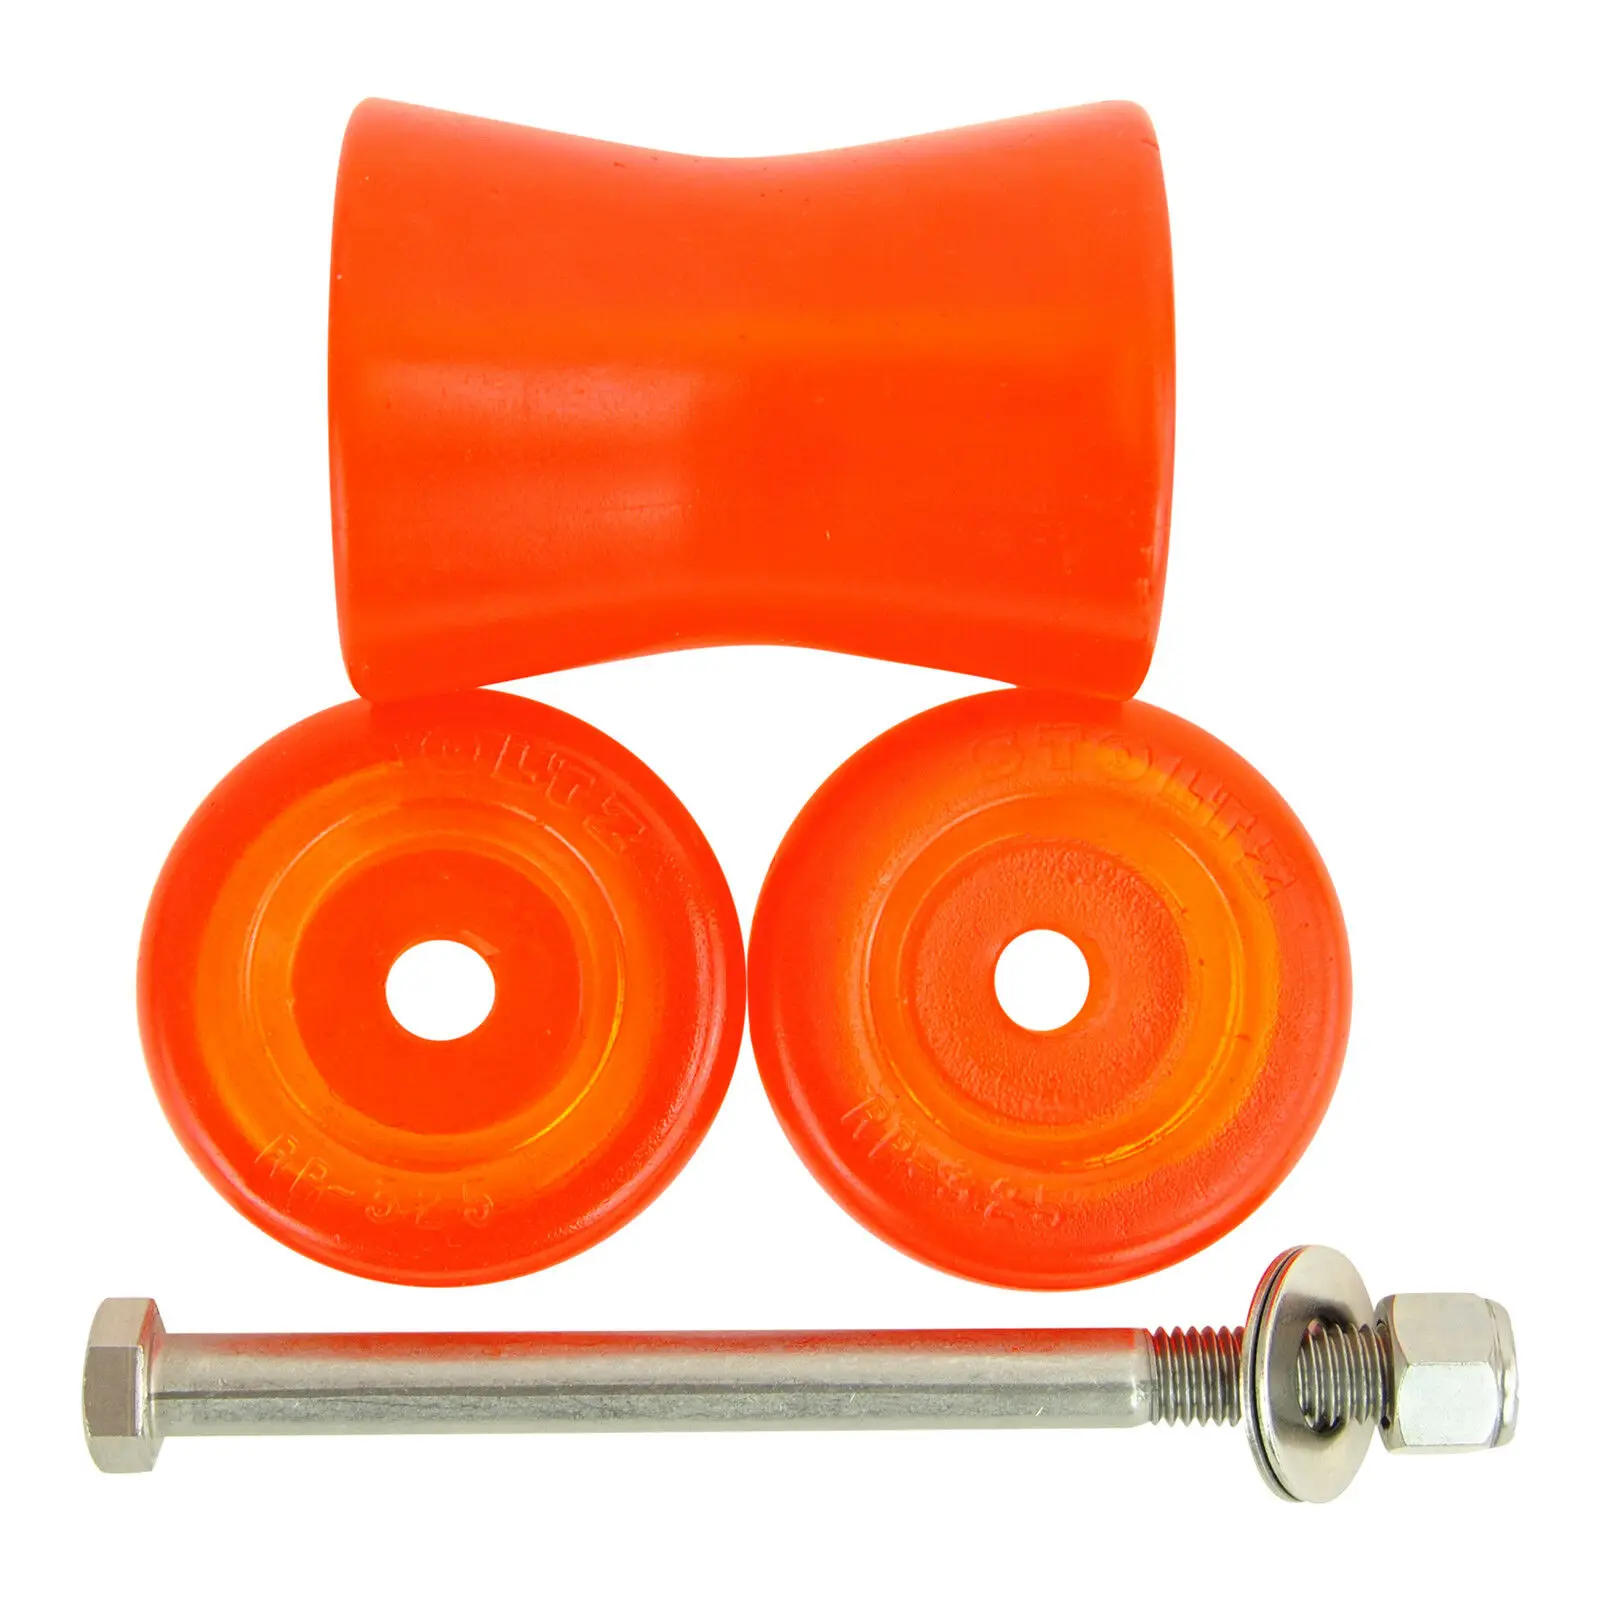 1/2" shaft 4" Inch Polyurethane Boat Trailer Bow Stop Roller Assy with Bells 